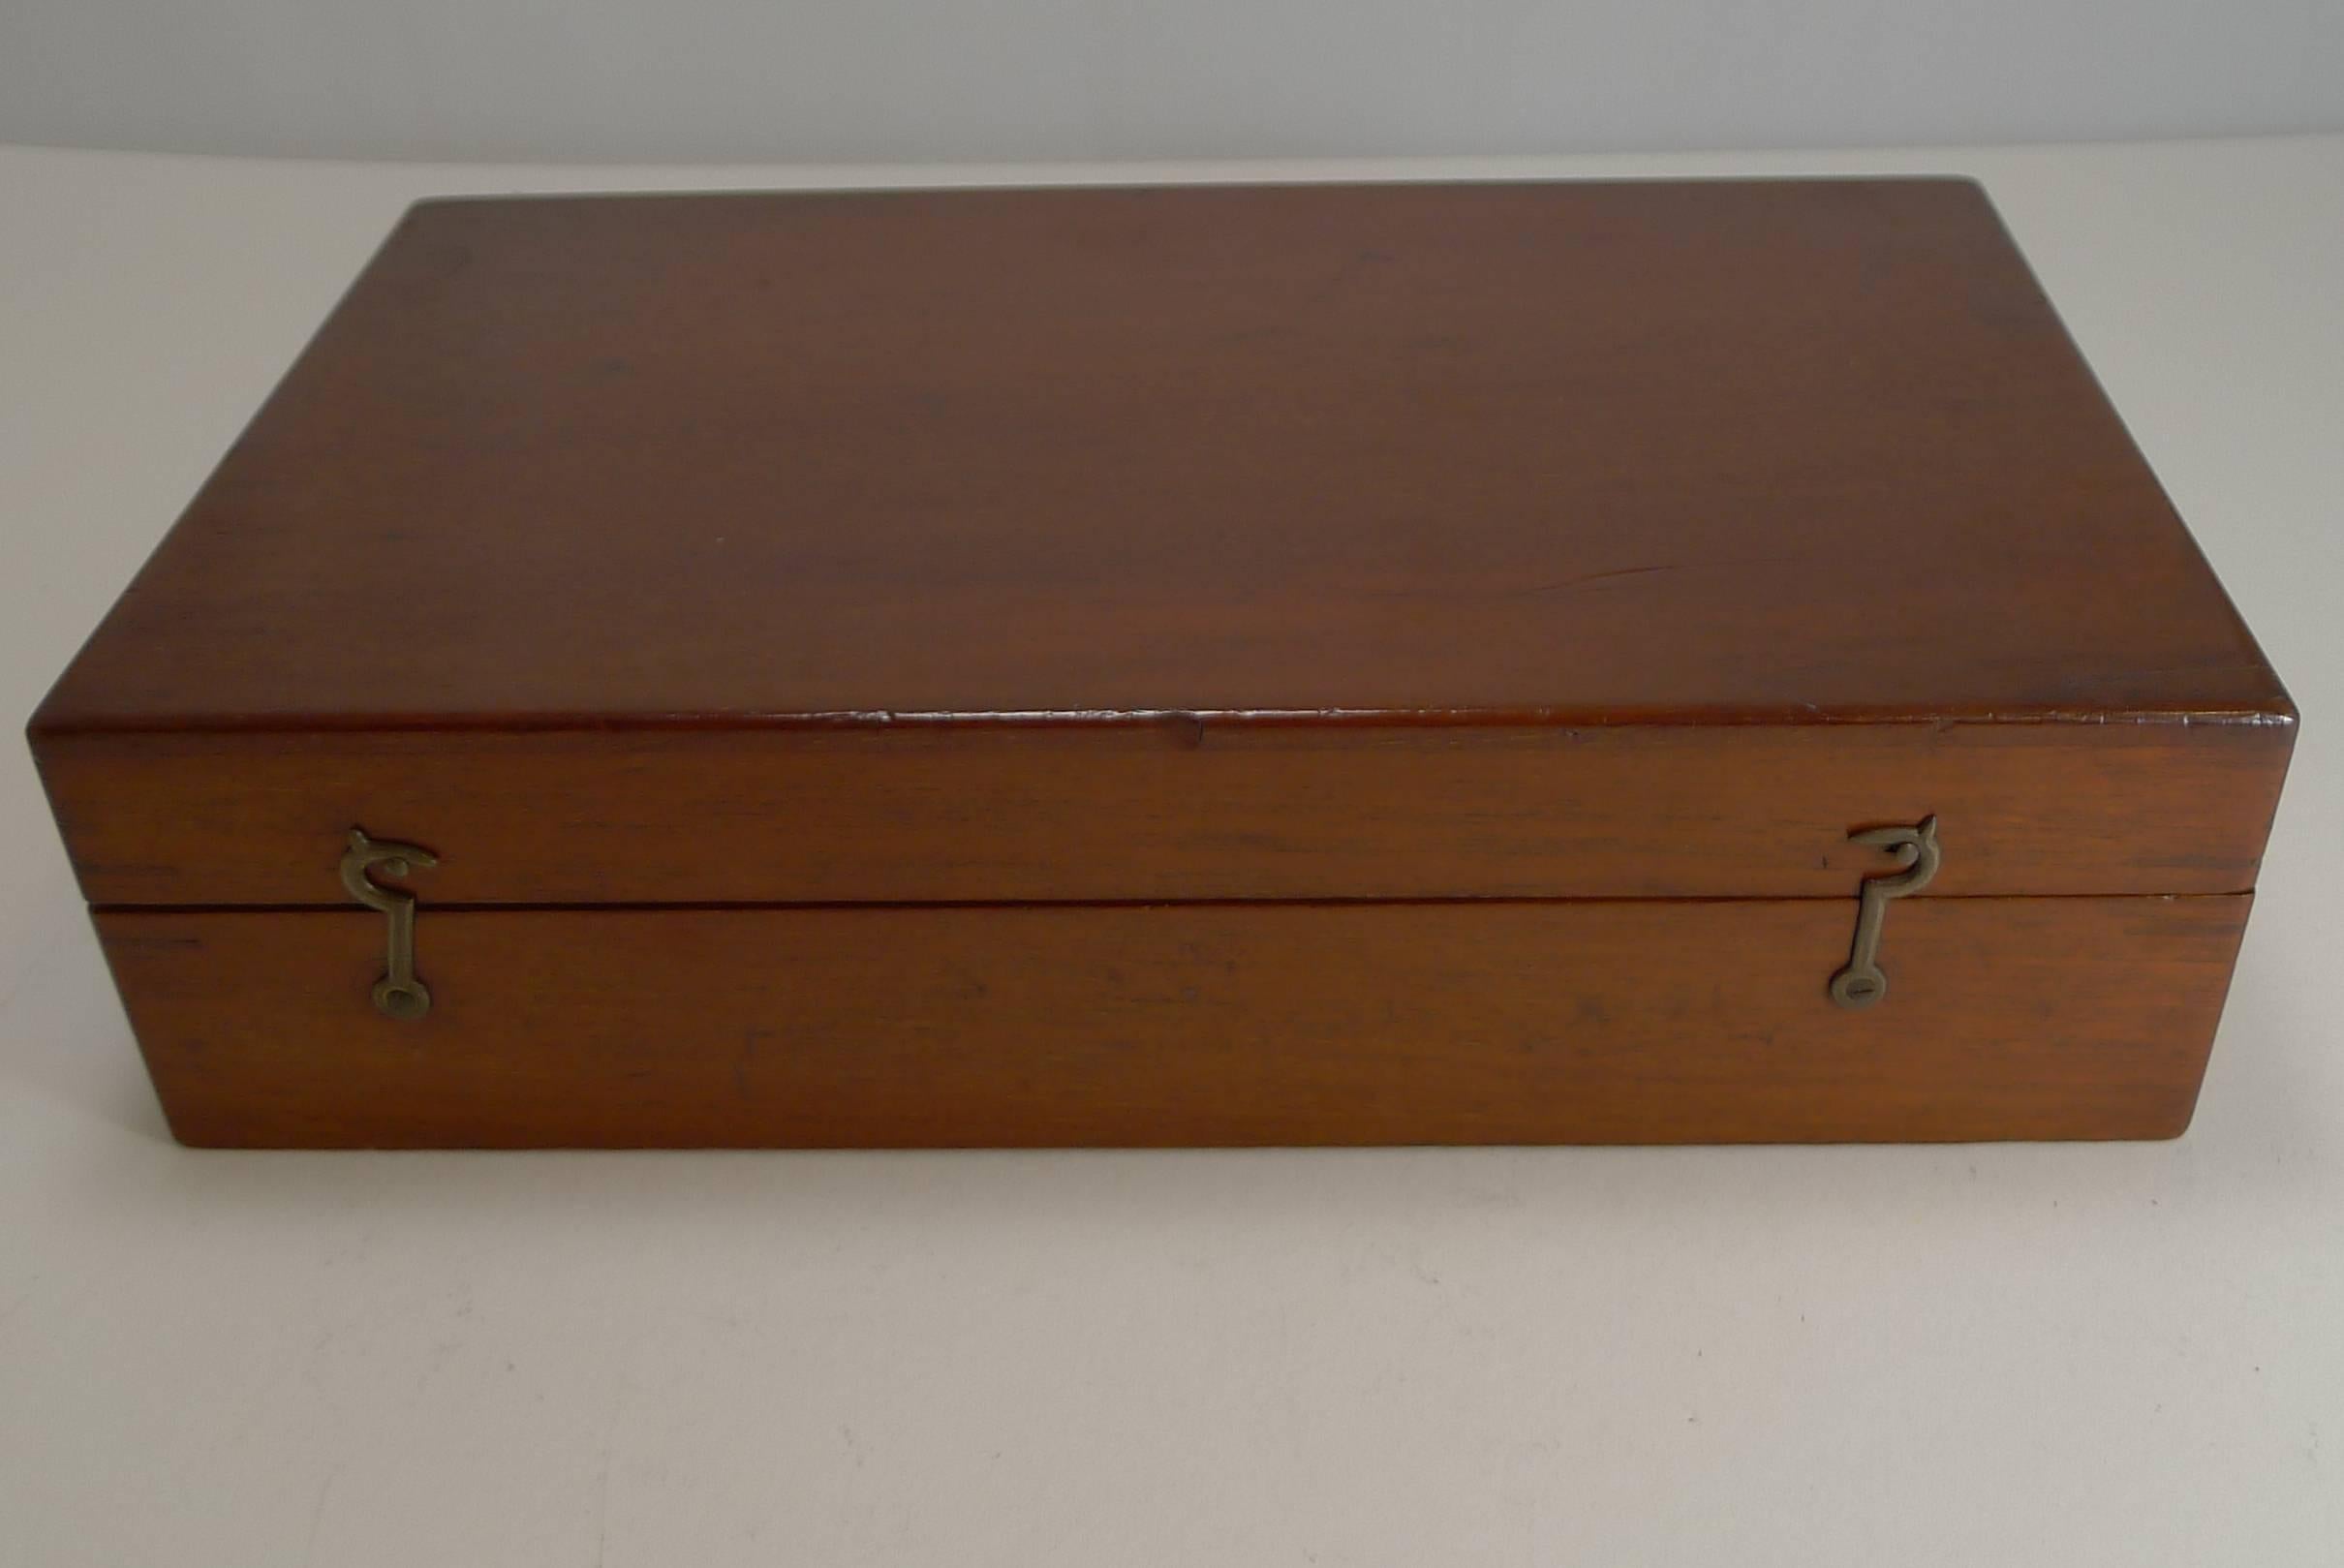 A fabulous Edwardian mahogany games box or compendium in fabulous condition. The box contains:

Three games boards: Chess / draughts / checkers; the race game and go bang. Original instruction booklet original gift card dated 1905 set boxwood and